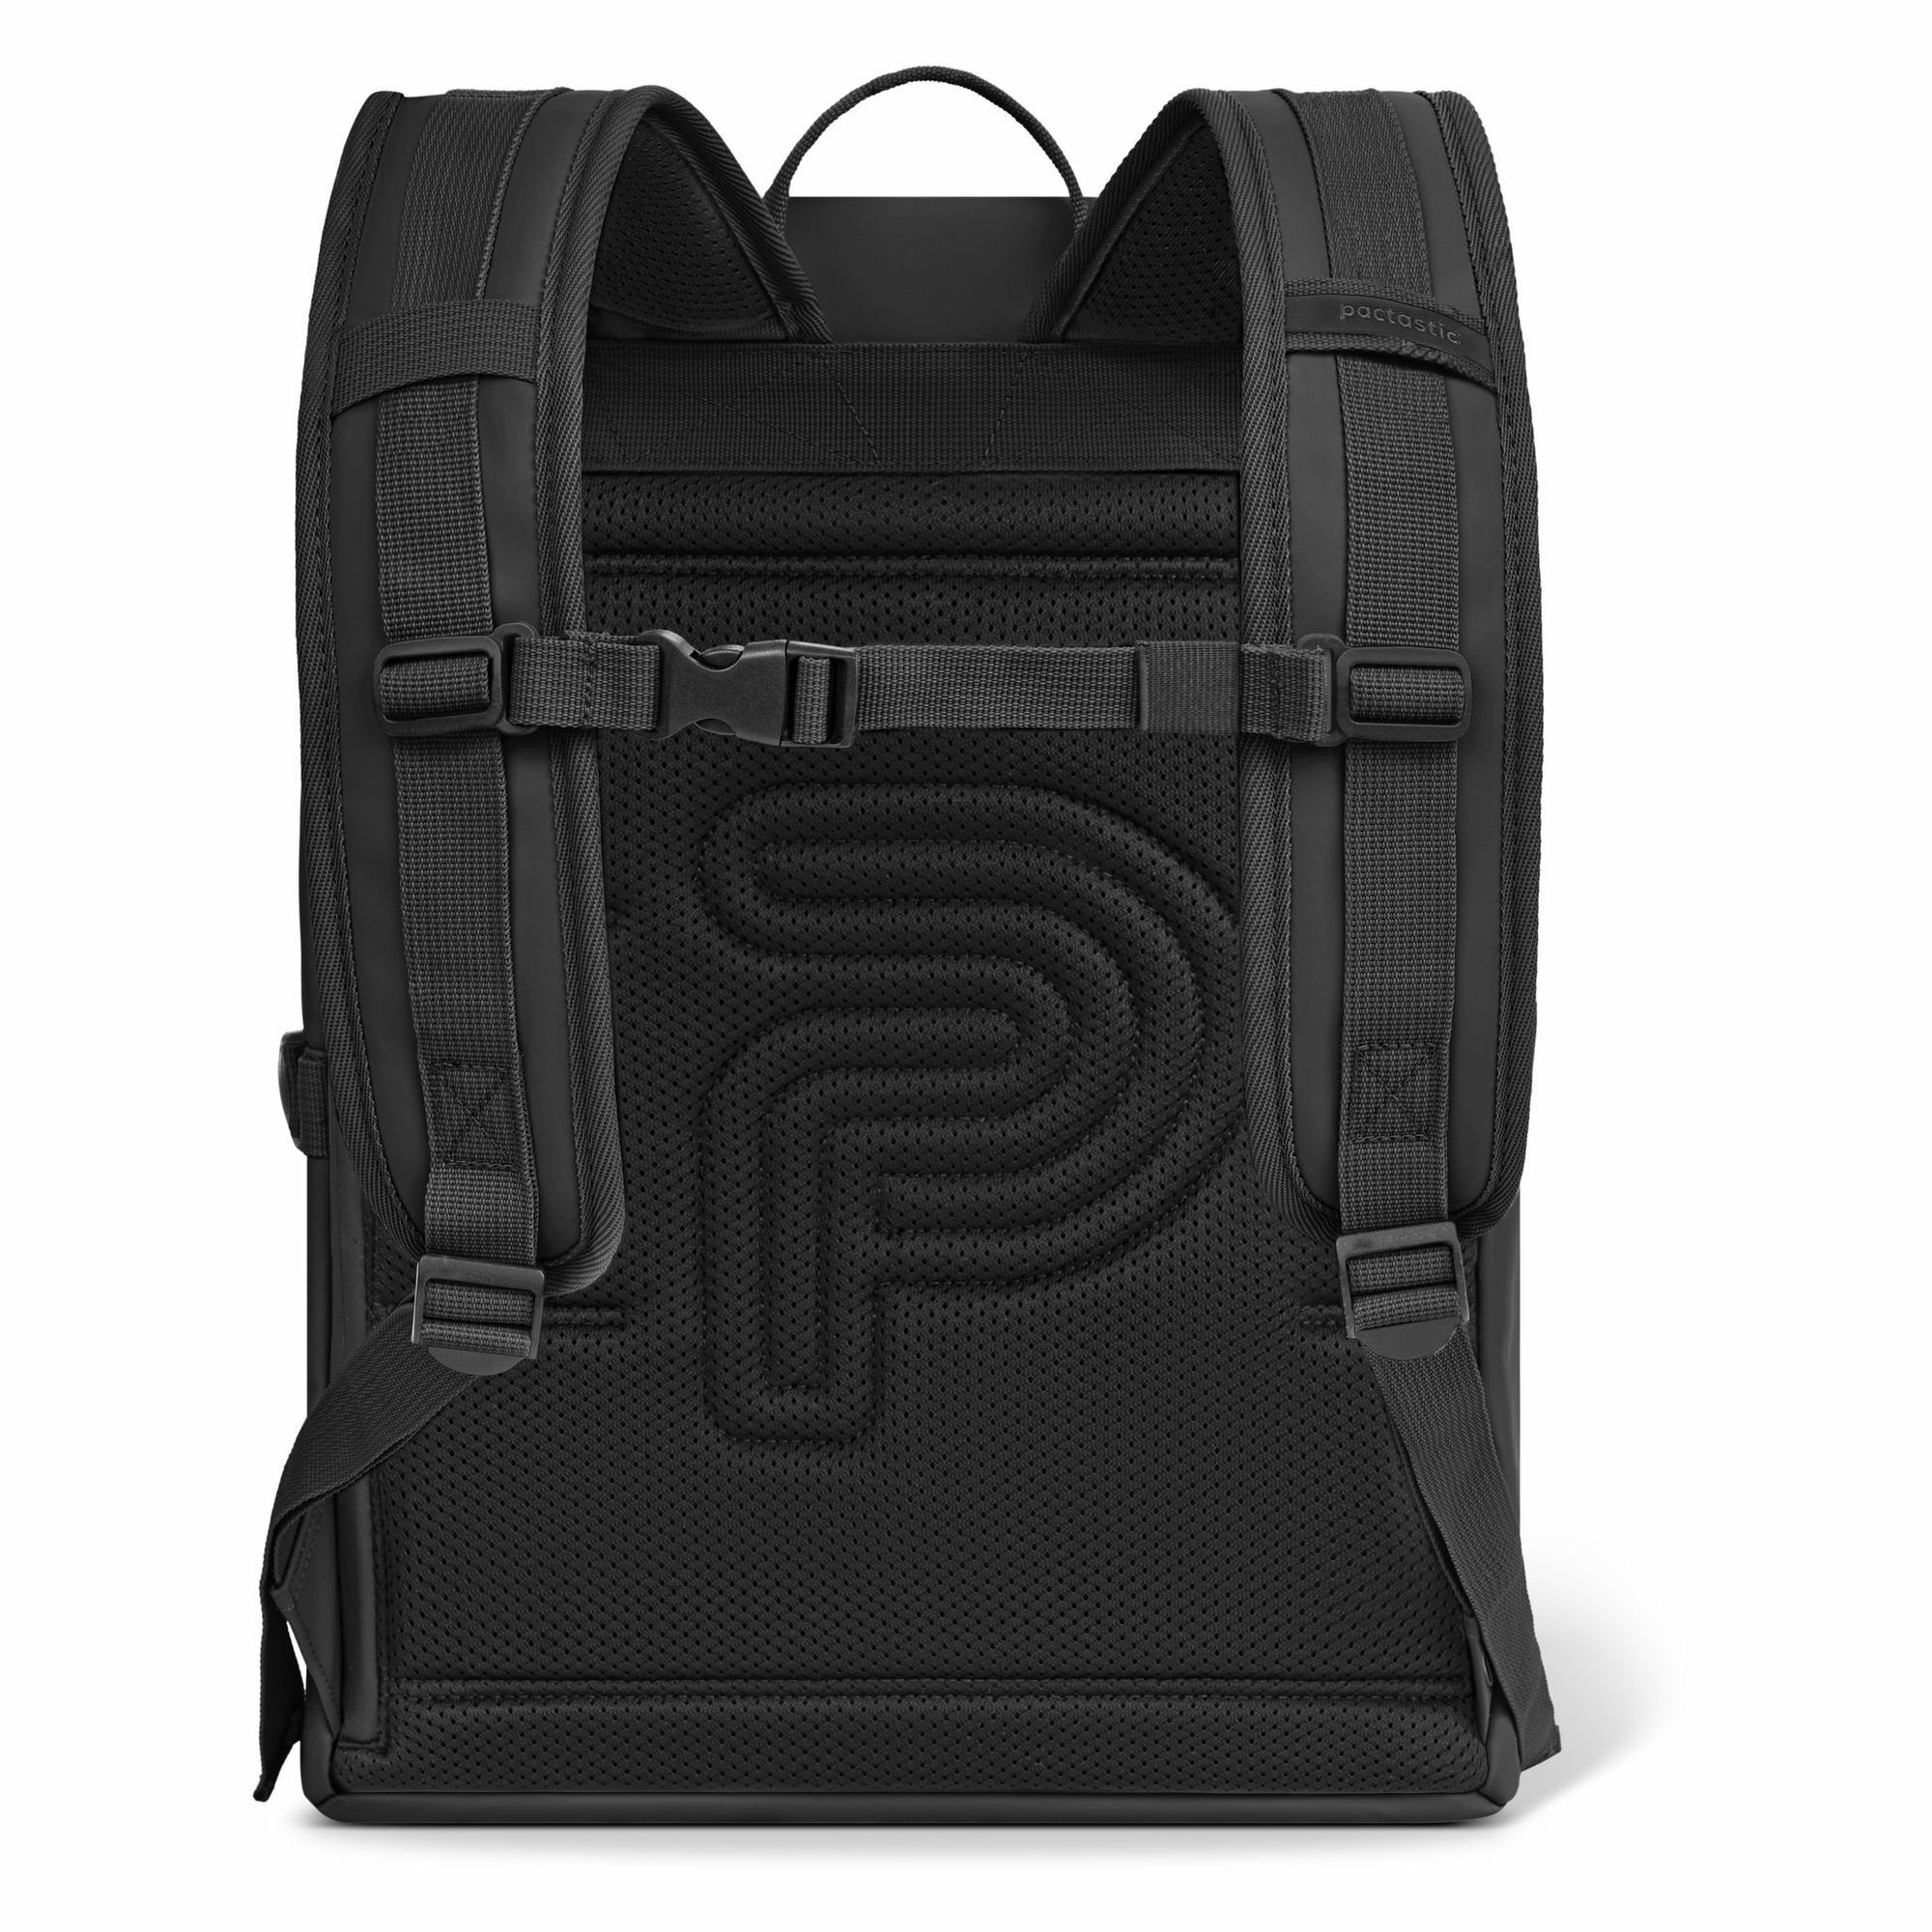 Pactastic Daypack Urban Collection, Veganes Tech-Material black